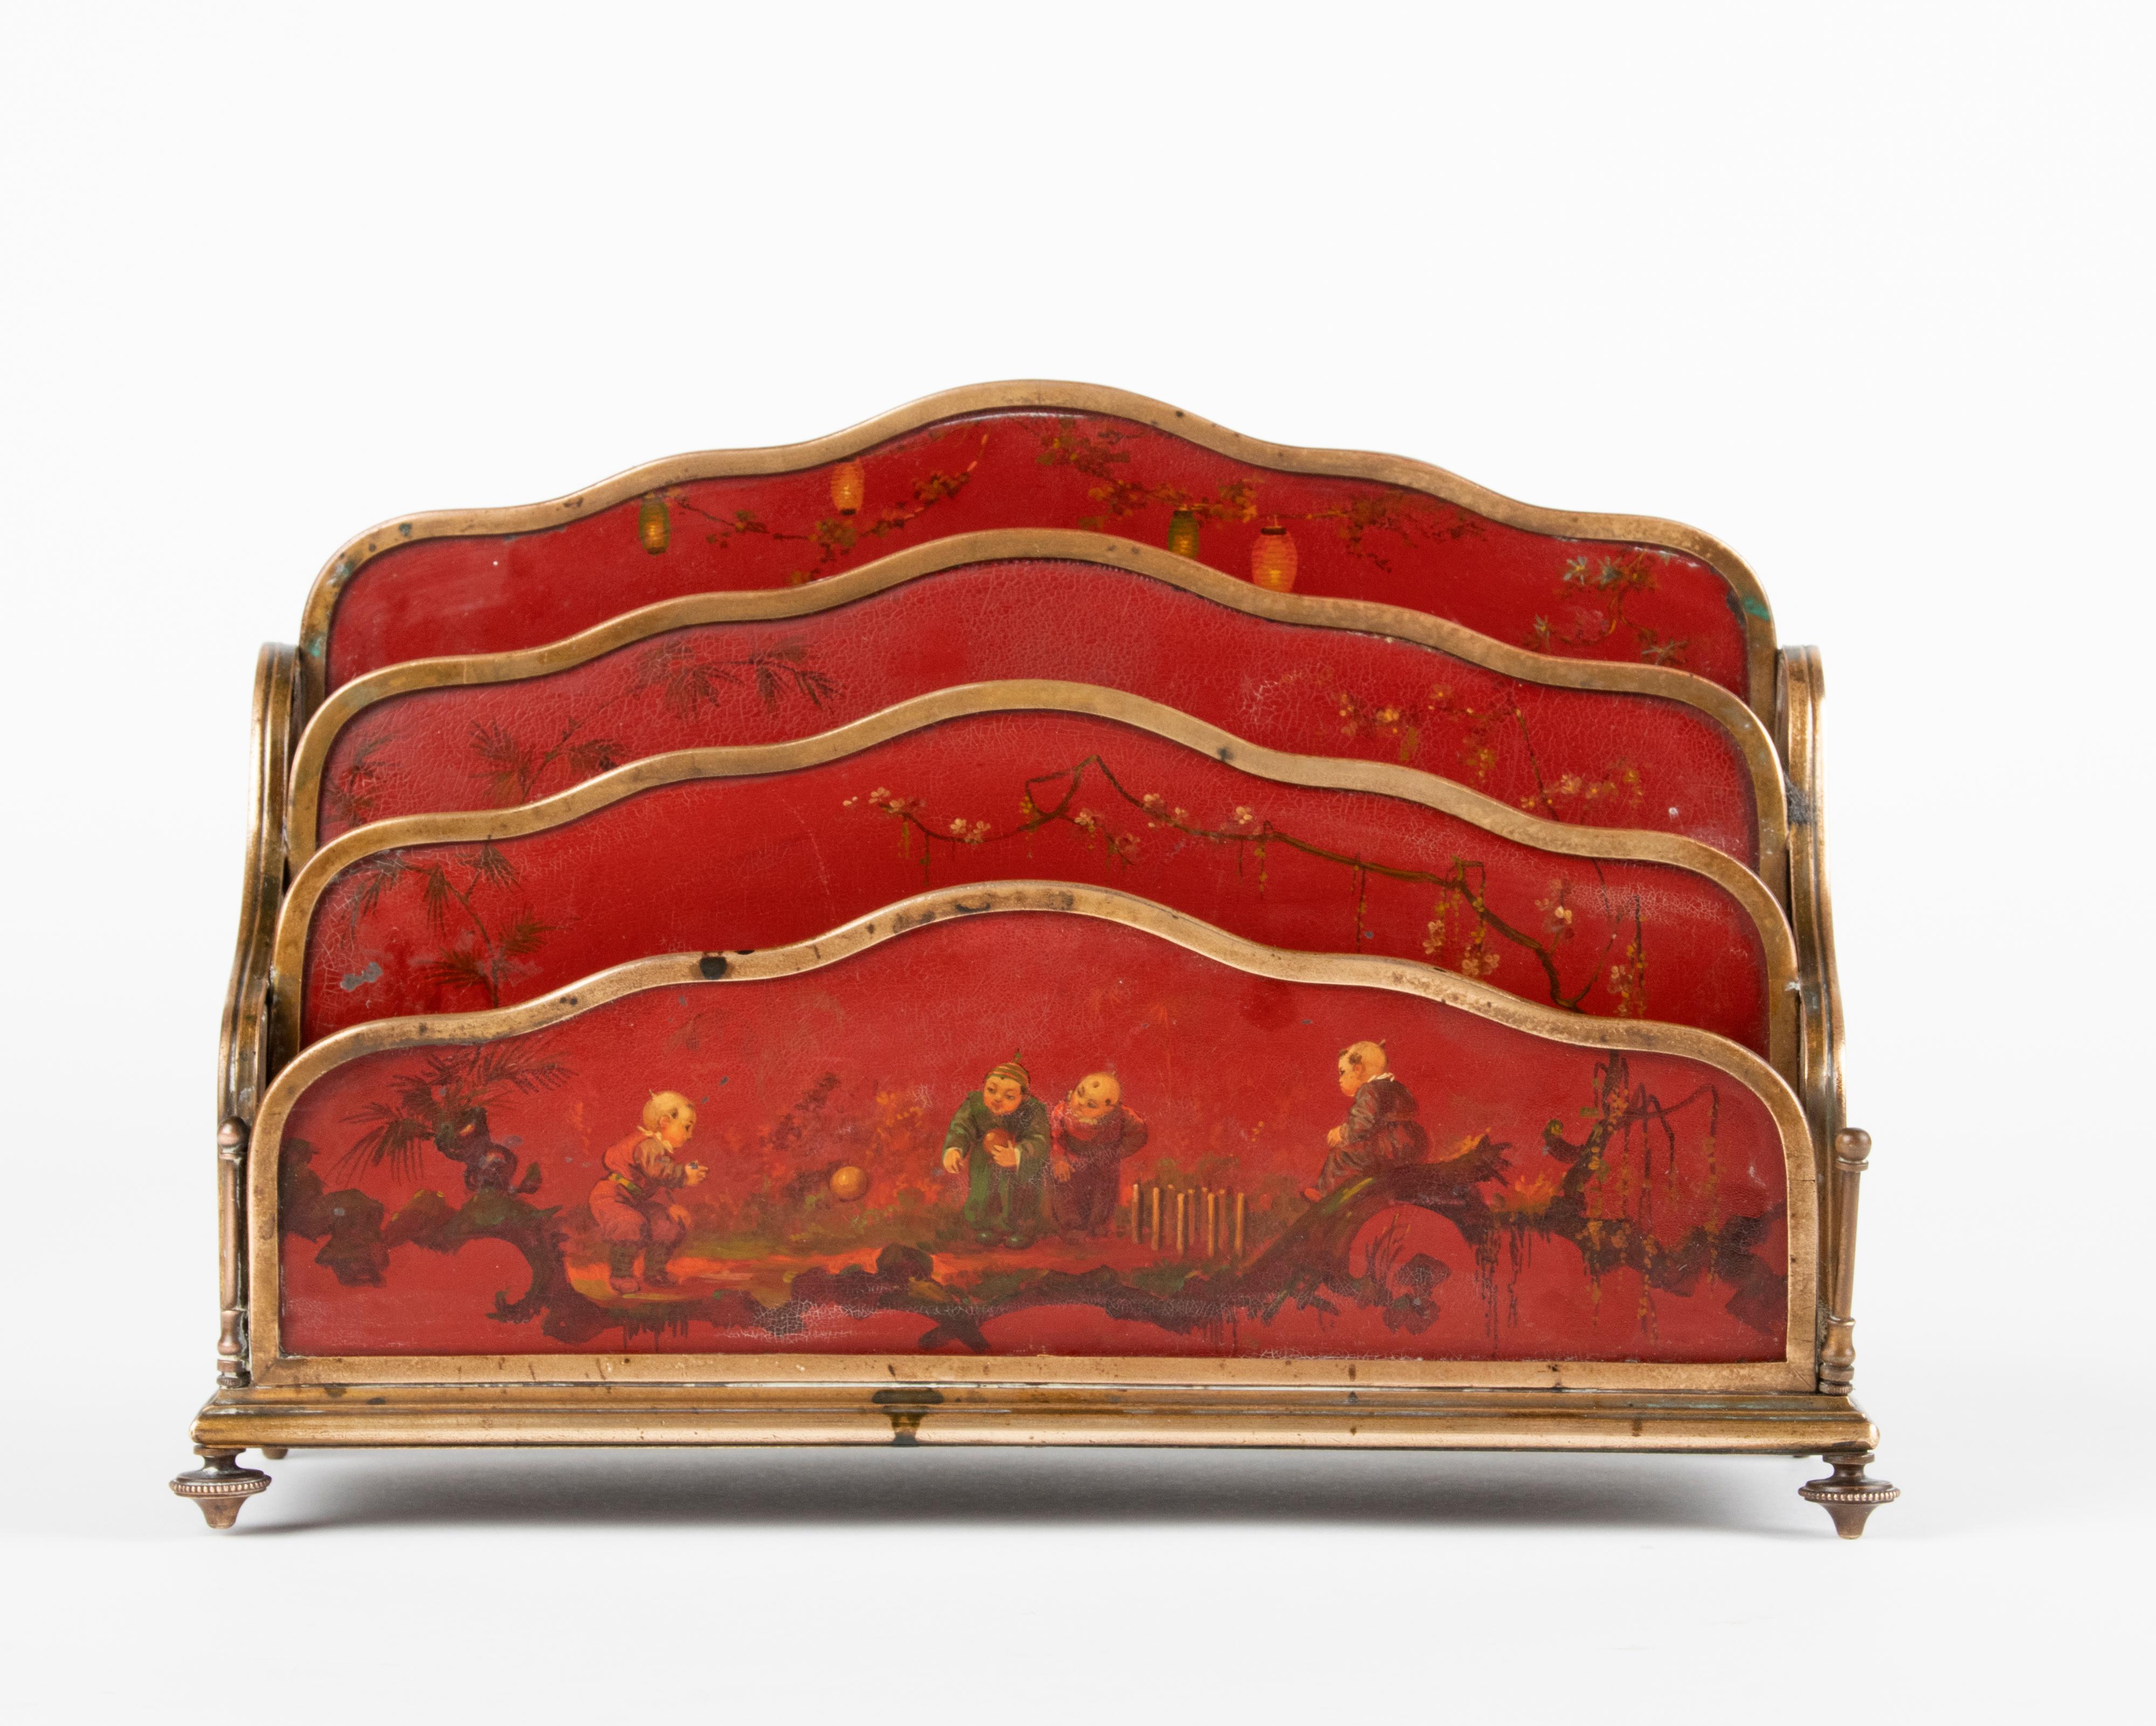 Beautiful 19th century letter rack from the French Napoleon III period. The letter rack is made of bronze with wooden panels. The wooden panels are decorated with red traditional lacquer and hand painted with oriental scenes. This letter rack is